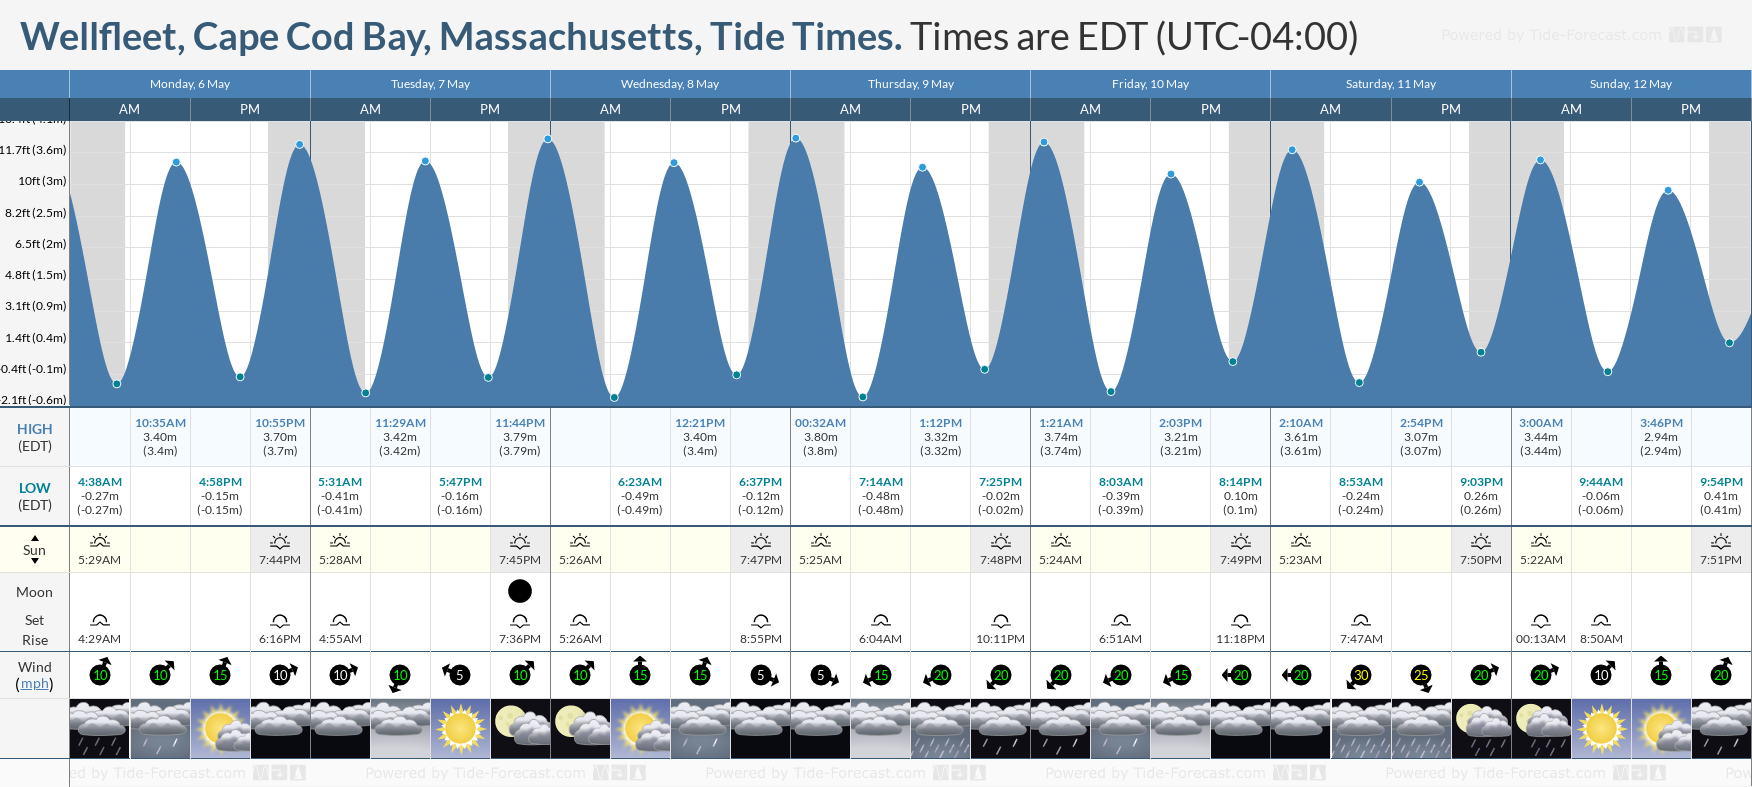 Wellfleet, Cape Cod Bay, Massachusetts Tide Chart including high and low tide tide times for the next 7 days